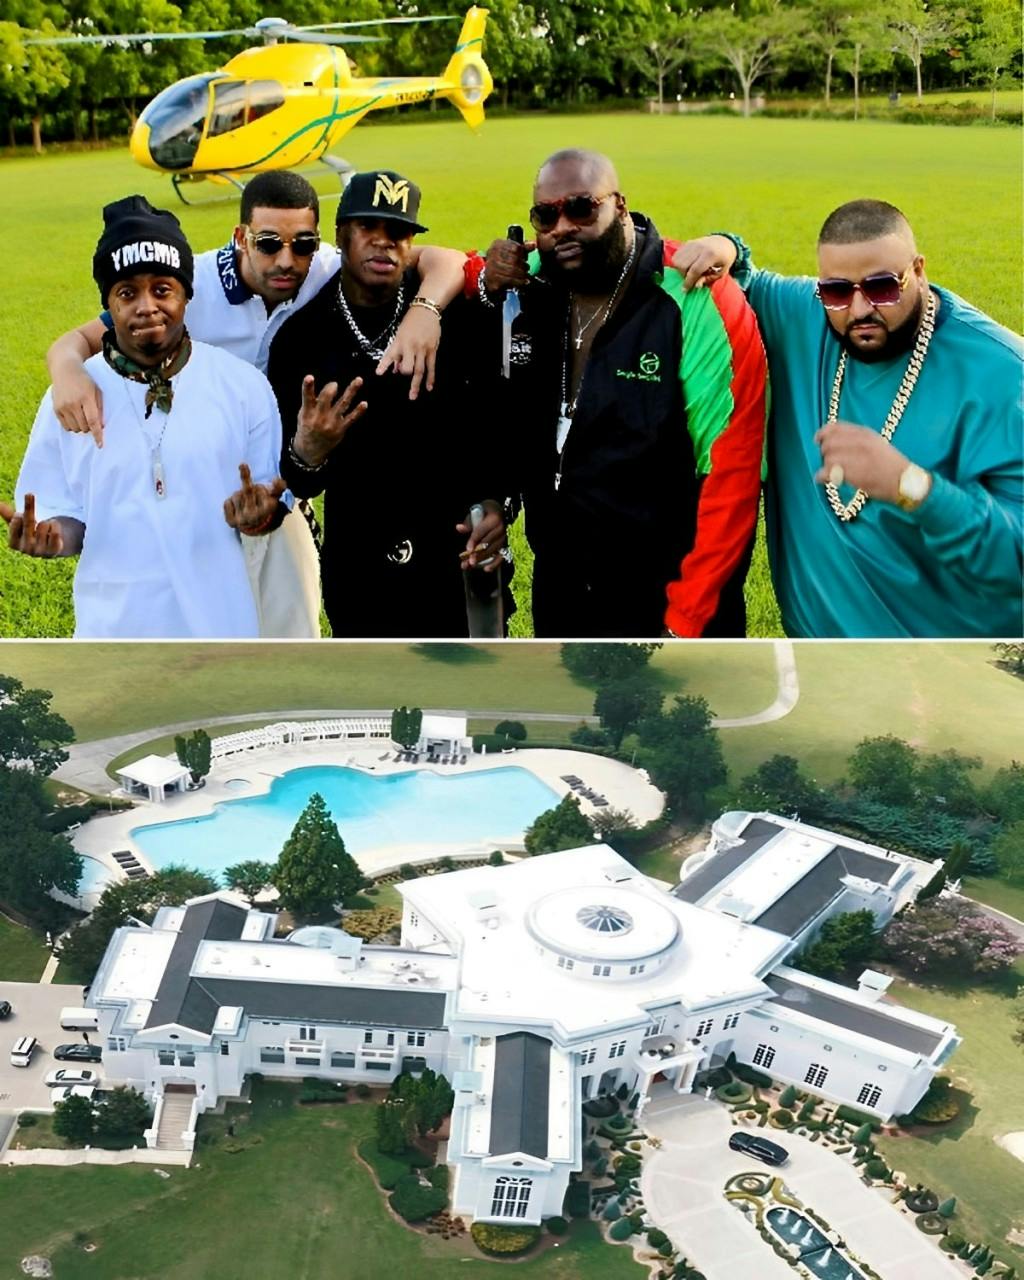 Cover Image for Rick Ross just bought a yellow helicopter just so he and his friends could see his massive property from above